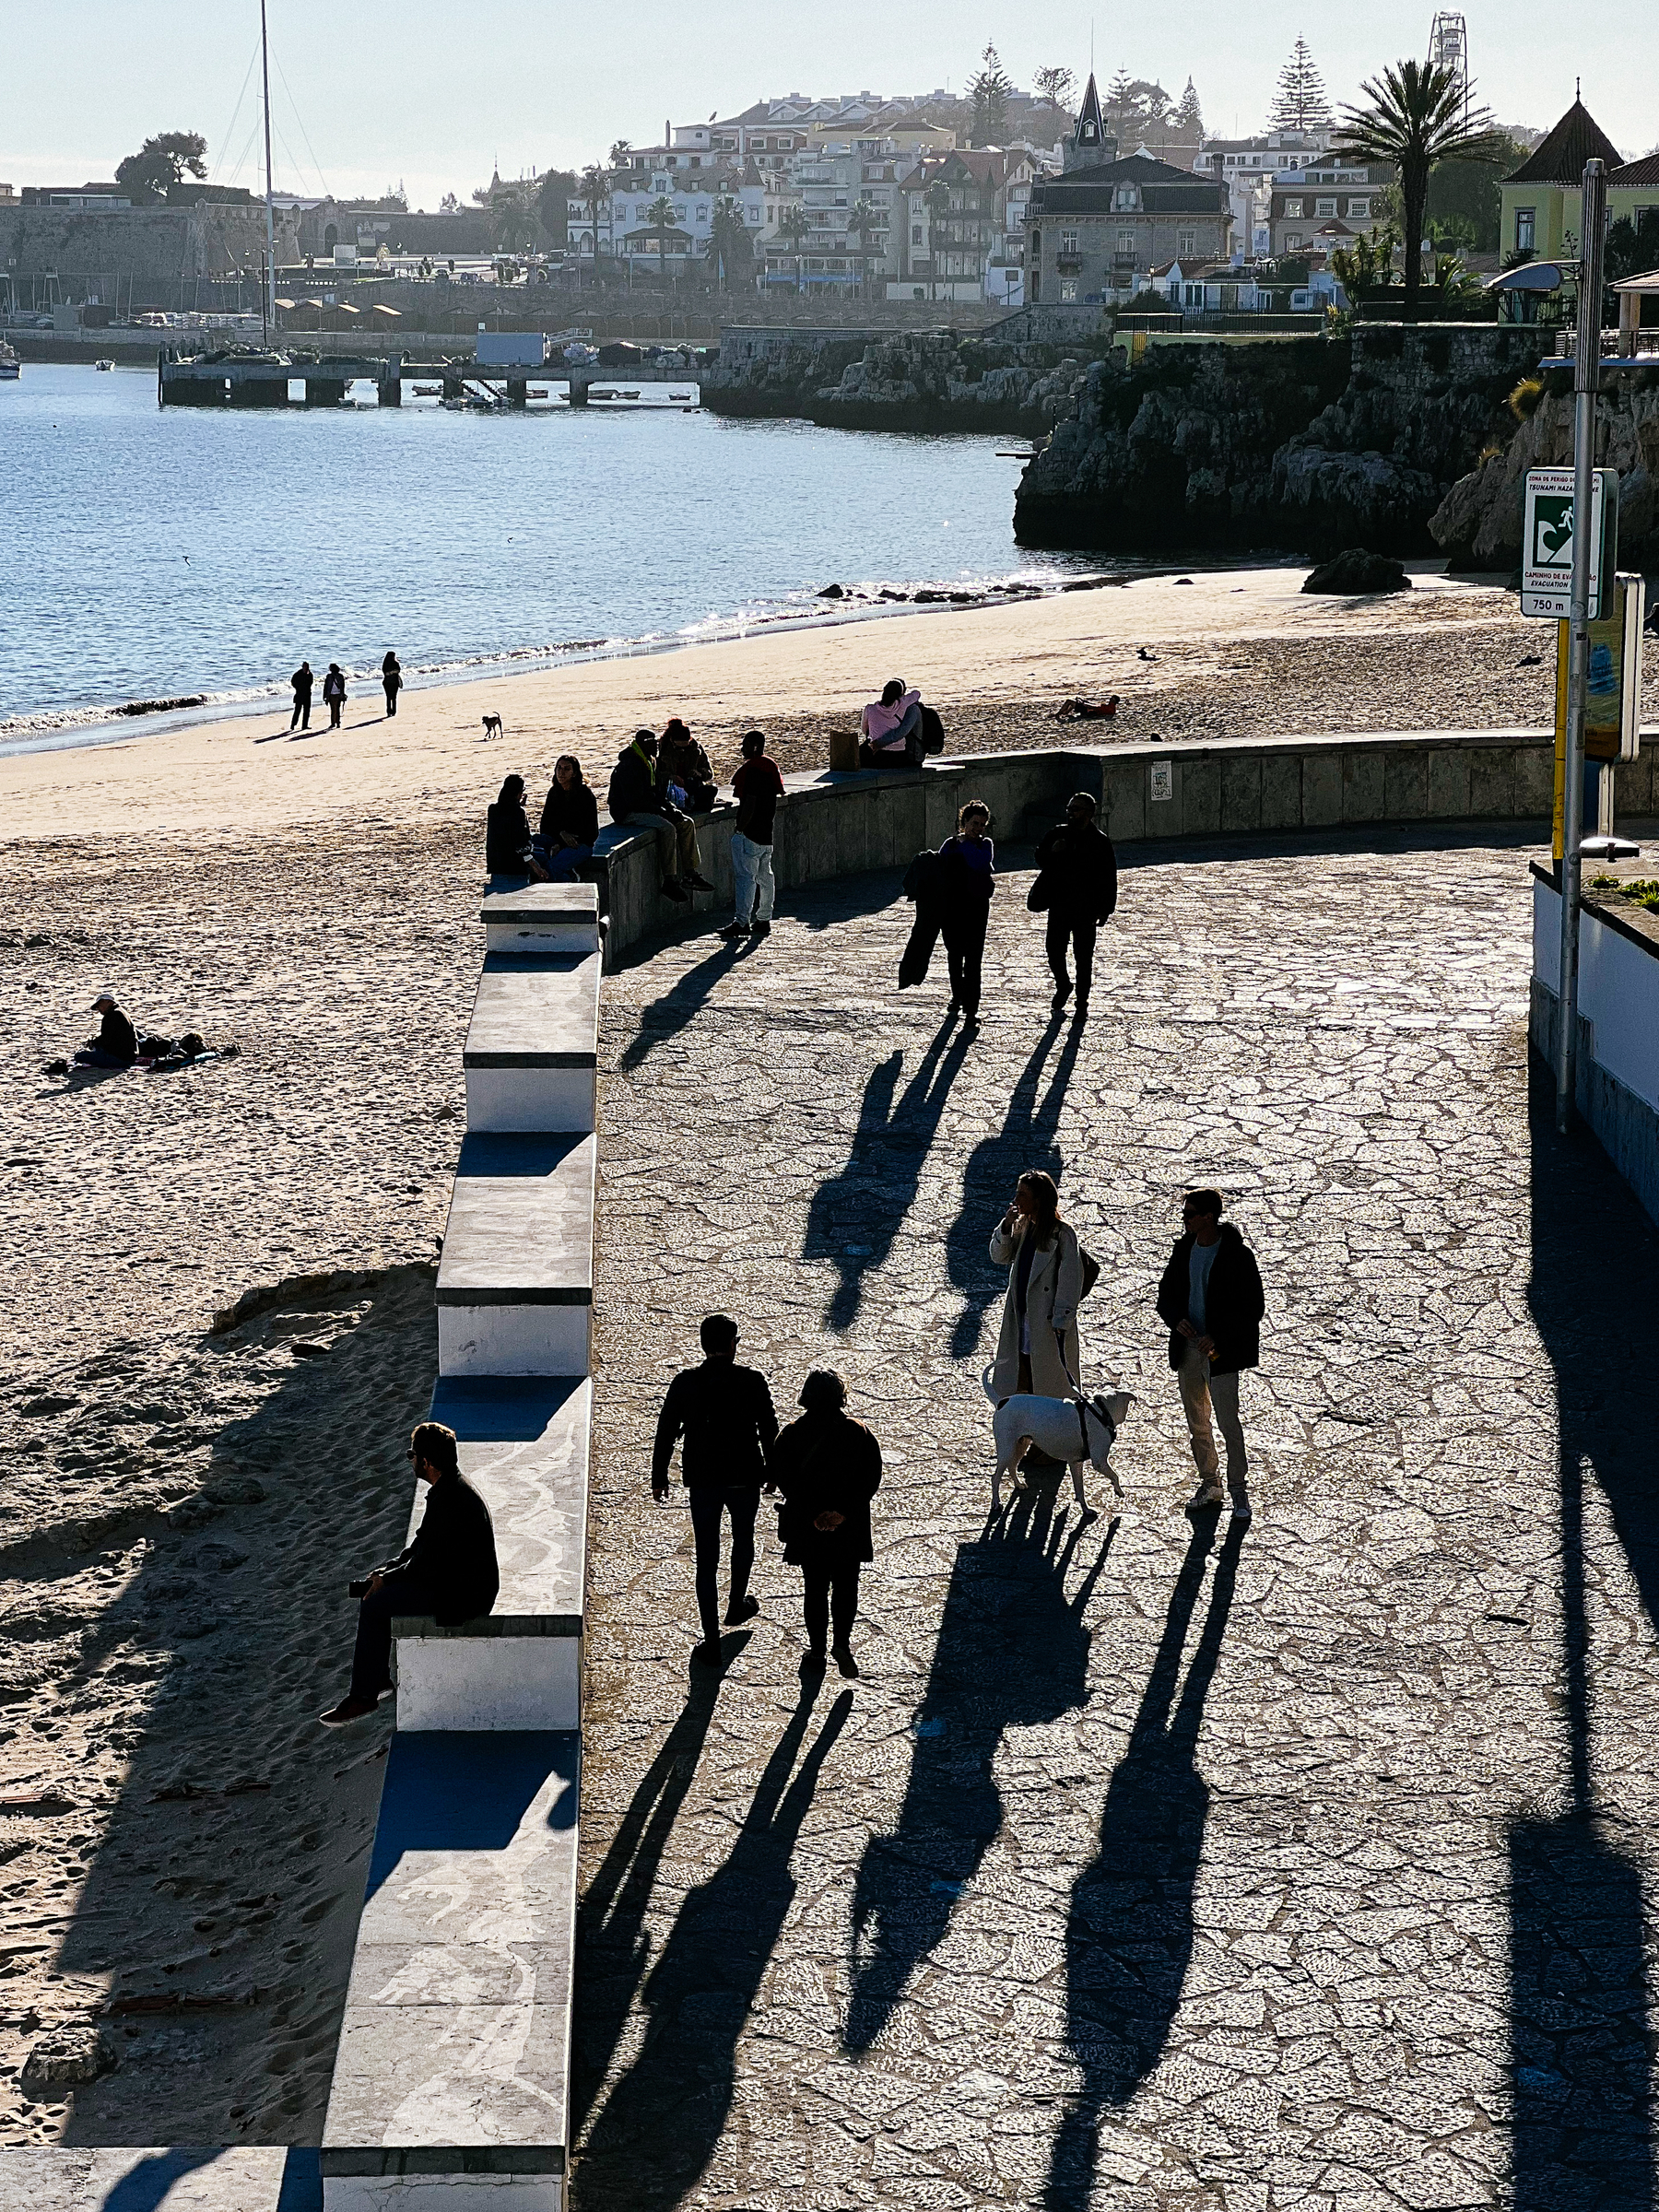 A seaside promenade with people walking and sitting, long shadows cast on the ground, a beach with a few individuals and a dog, calm sea, and a backdrop of buildings and cliffs.